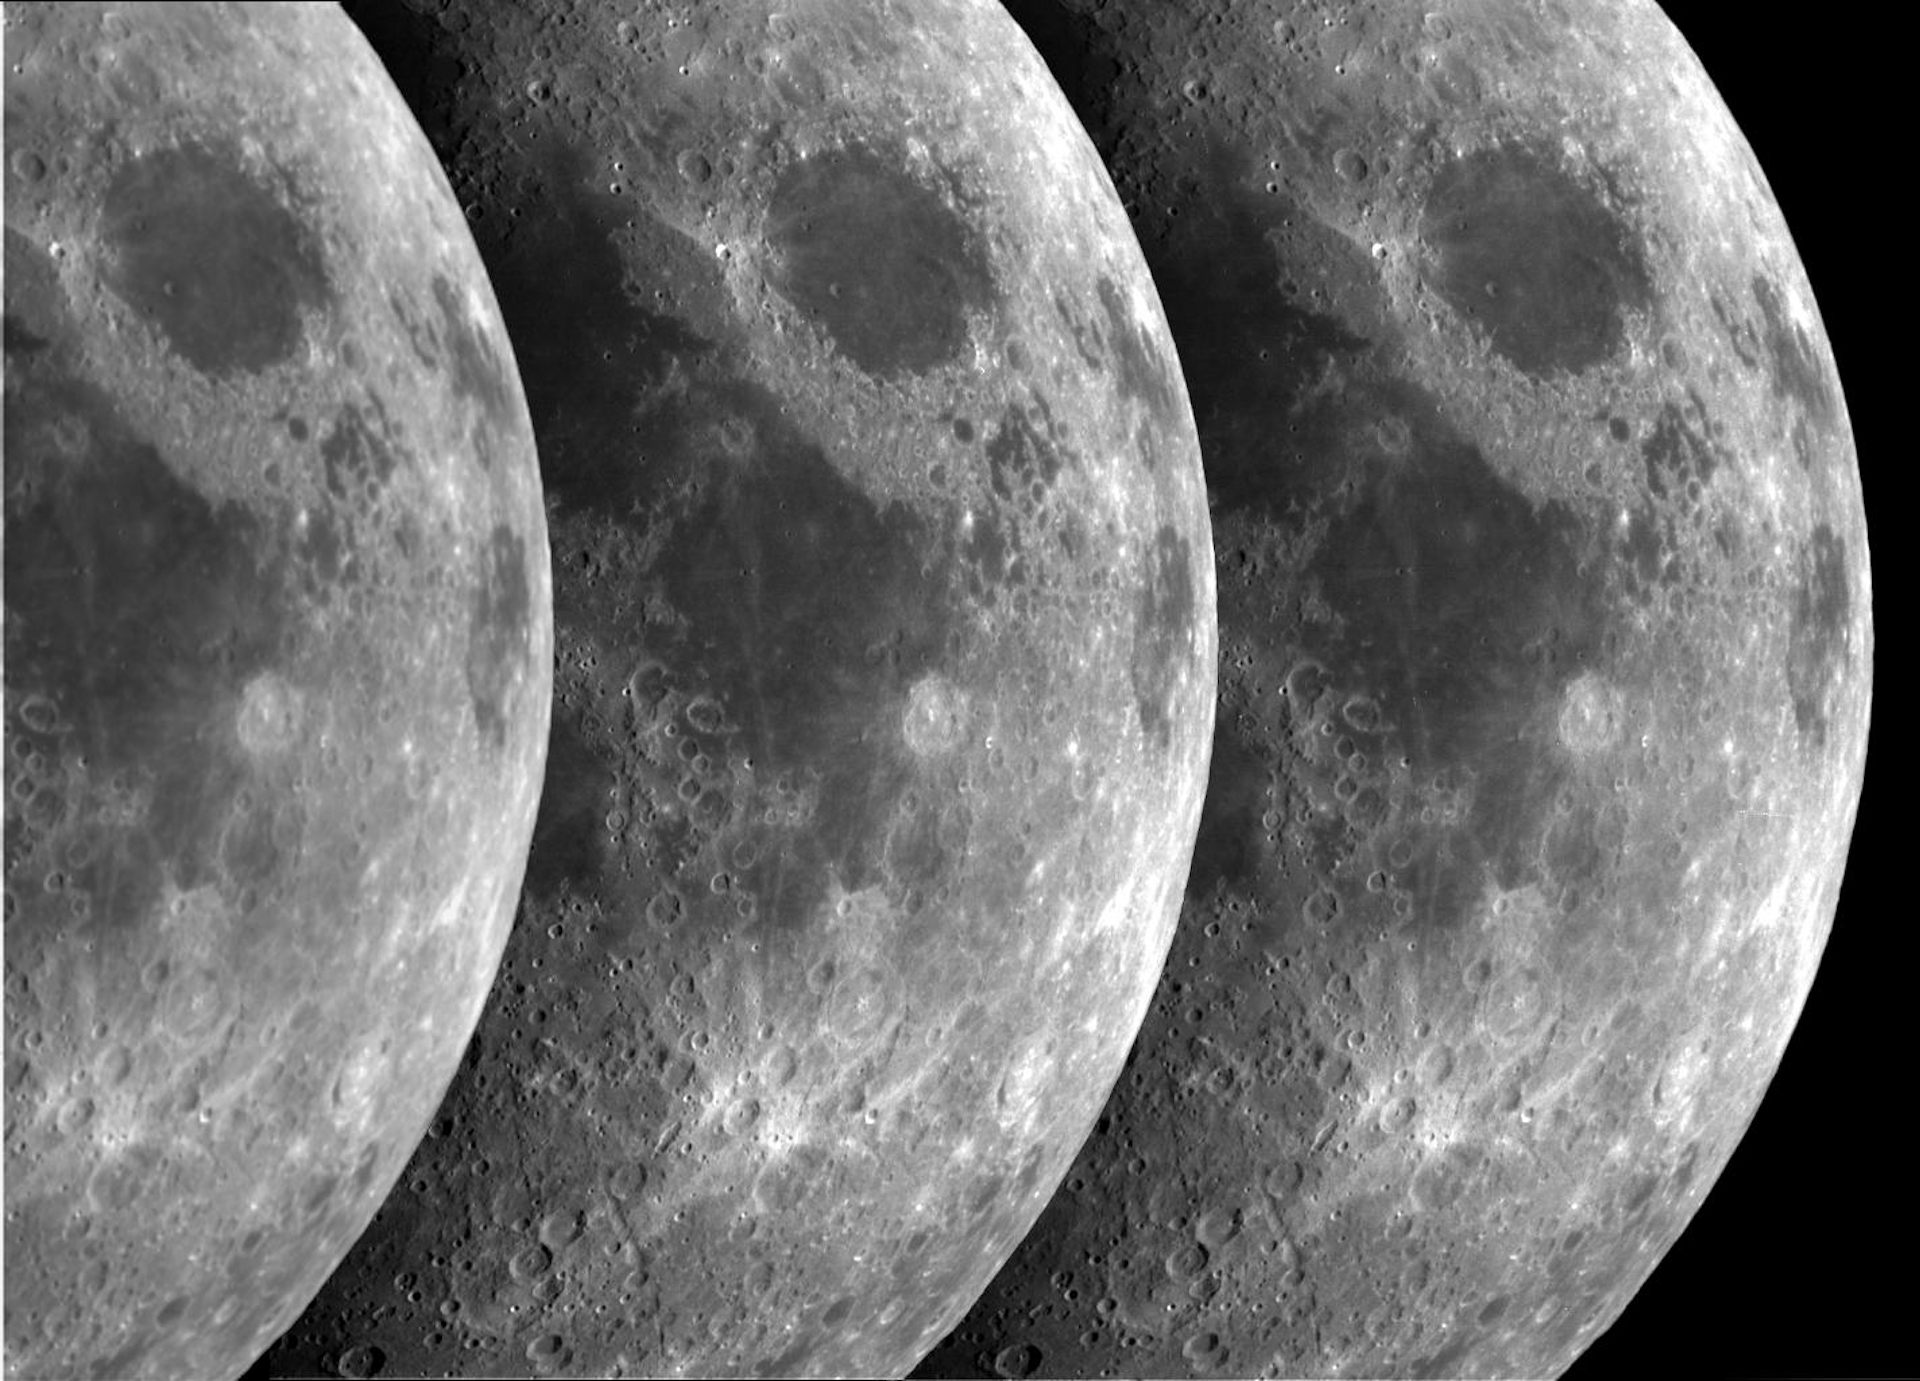 Returning to the Moon can benefit commercial, military and political sectors – a space policy expert explains